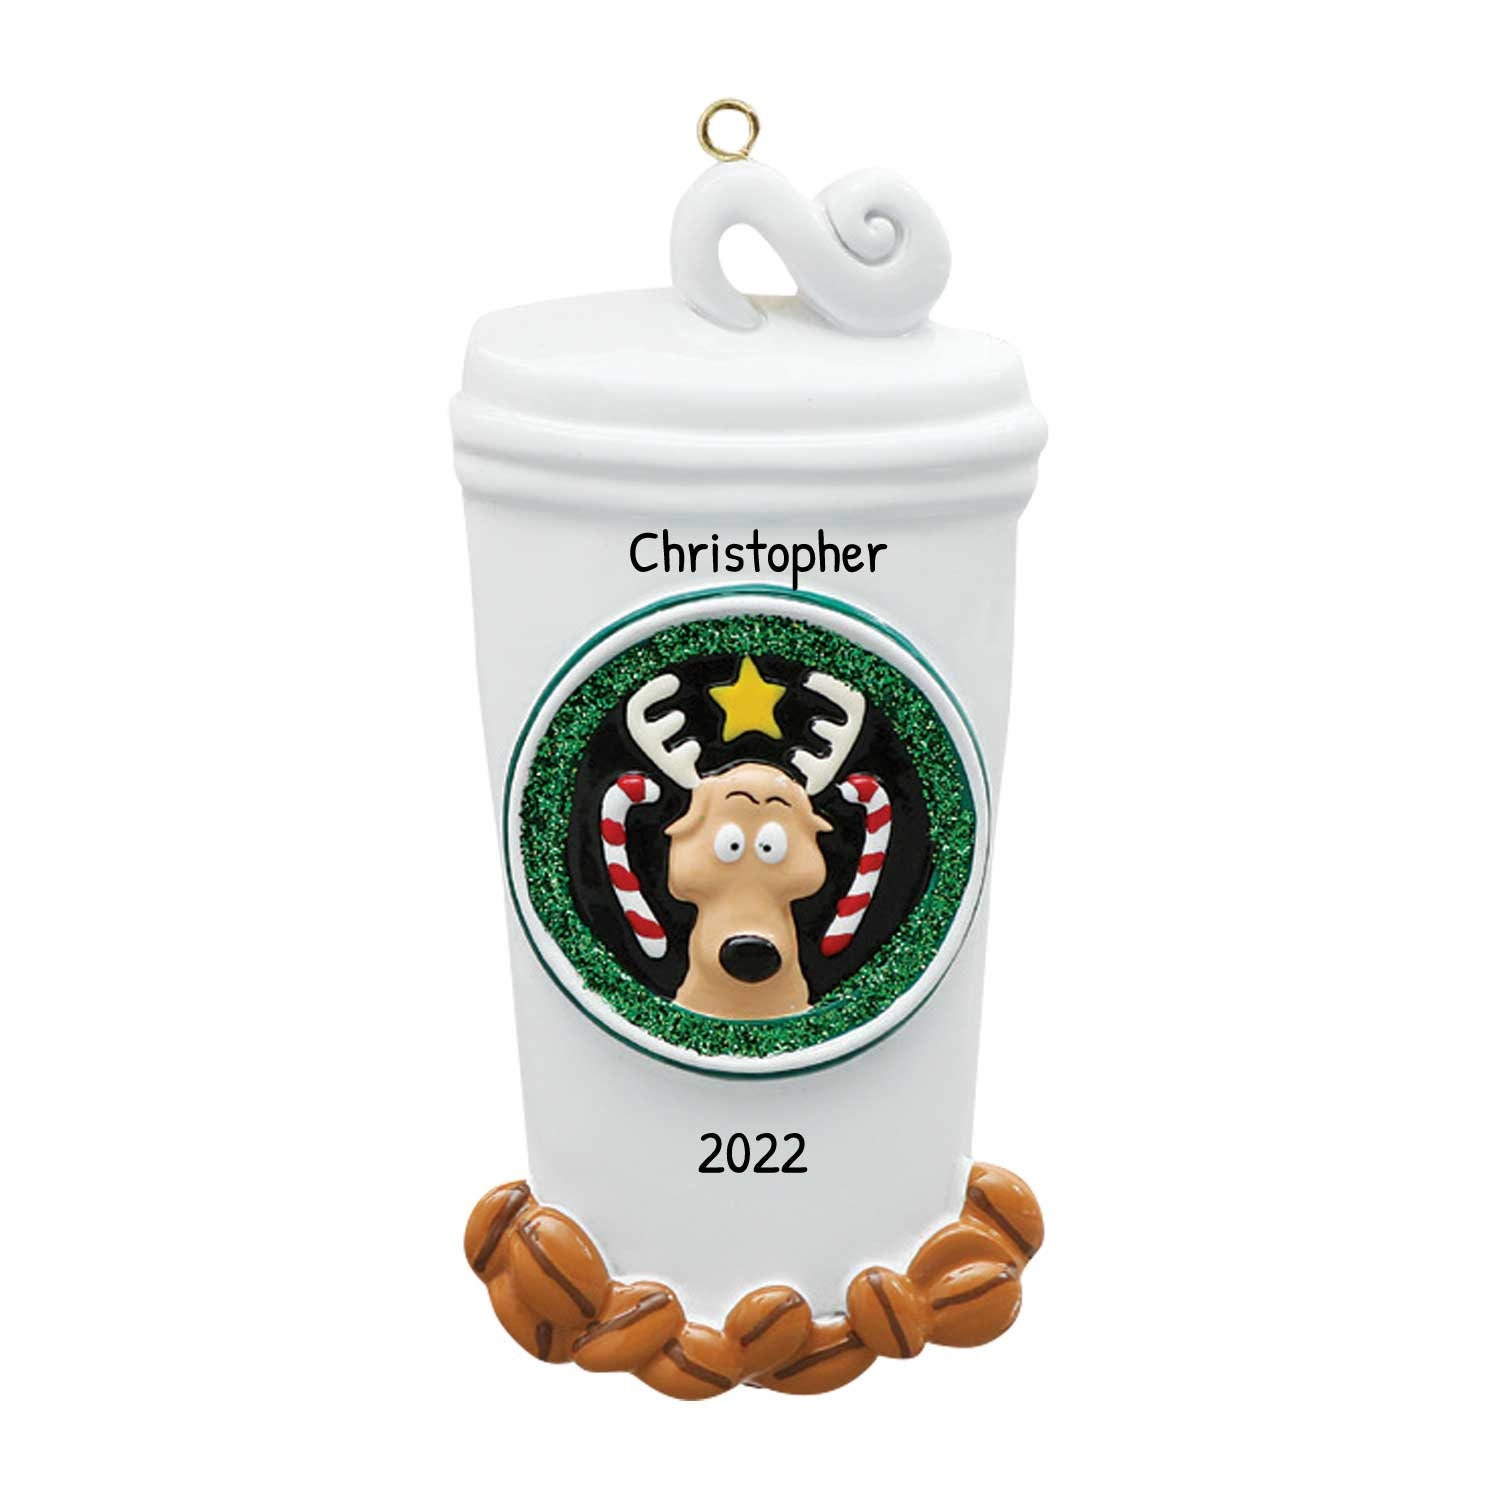 Starbucks Christmas Ornaments from 2019 (Set of 2) - Ceramic Merry Coffee  Design